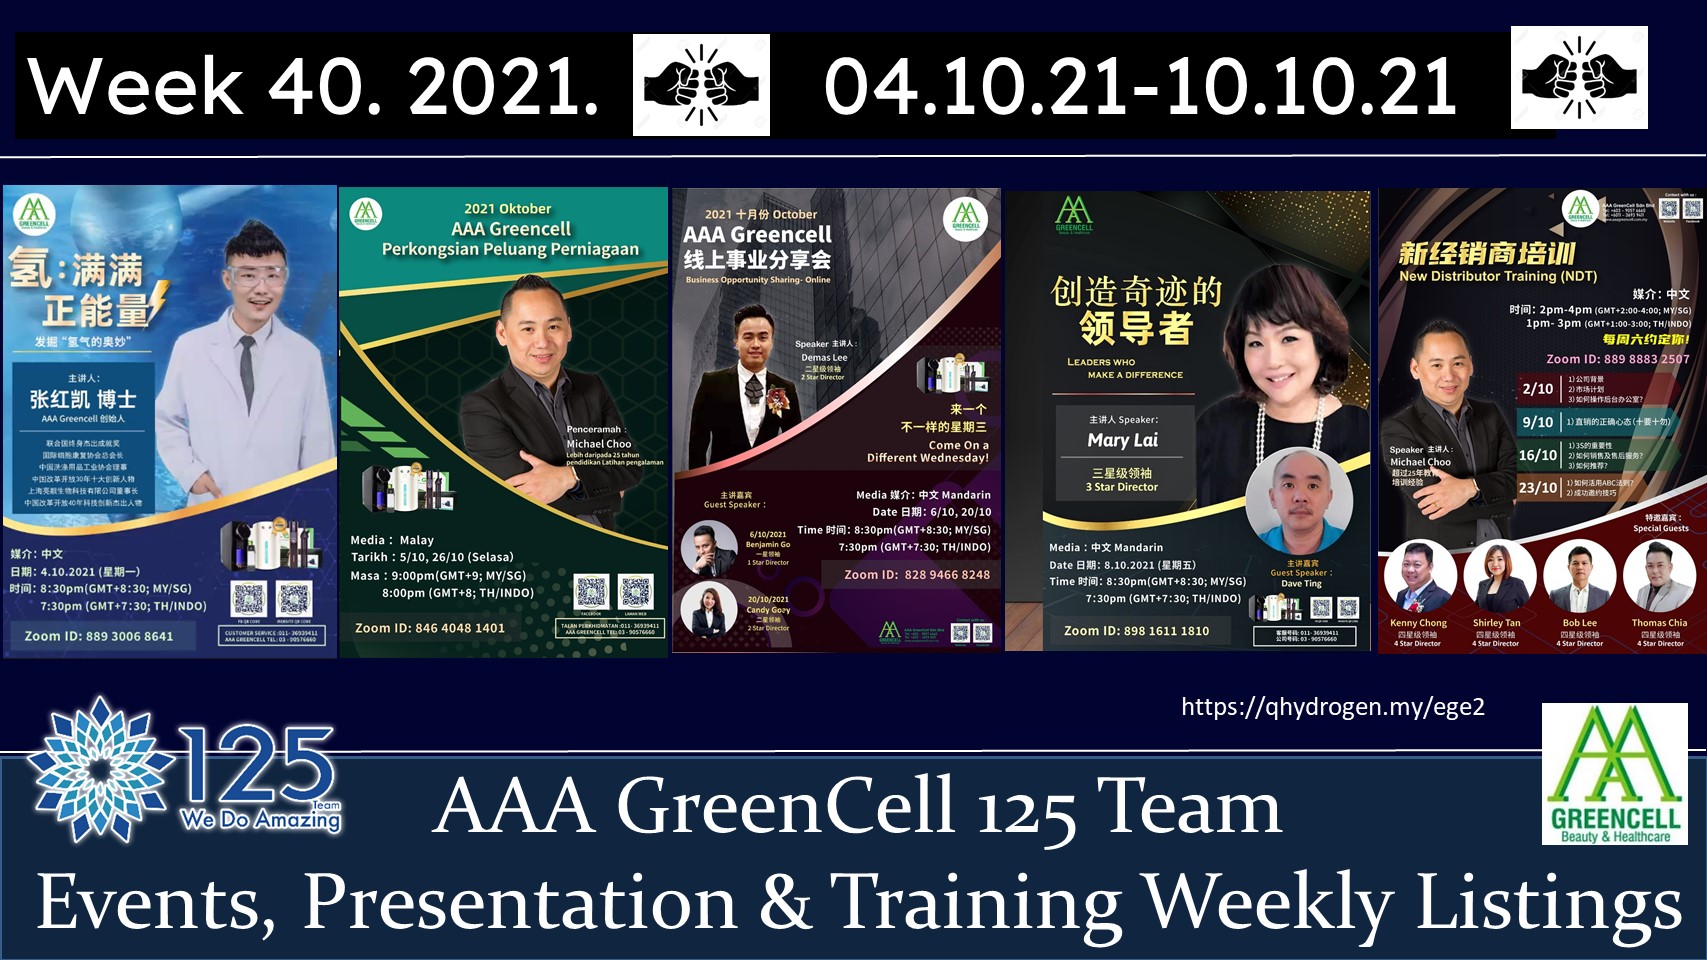 AAA GreenCell AAA 125 Team Events, Presentation and Training for Week 40. Dates 04.10.21-10.10.21. Hydrogen Qhydrogen Giap One